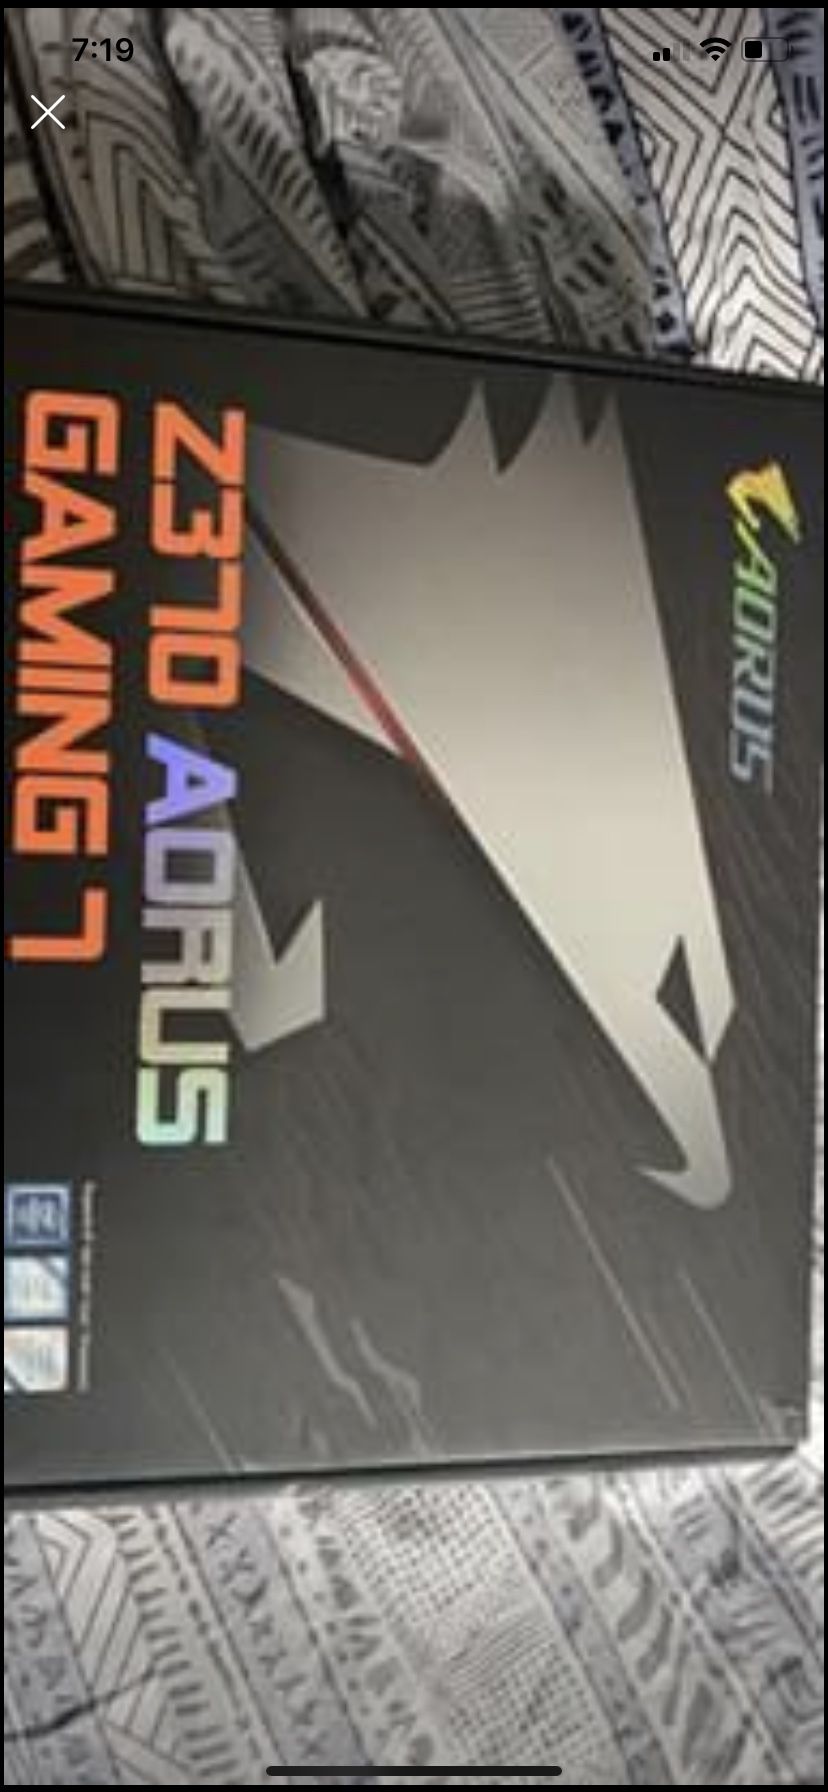 AORUS gaming 7 Z370 PICK UP ONLY